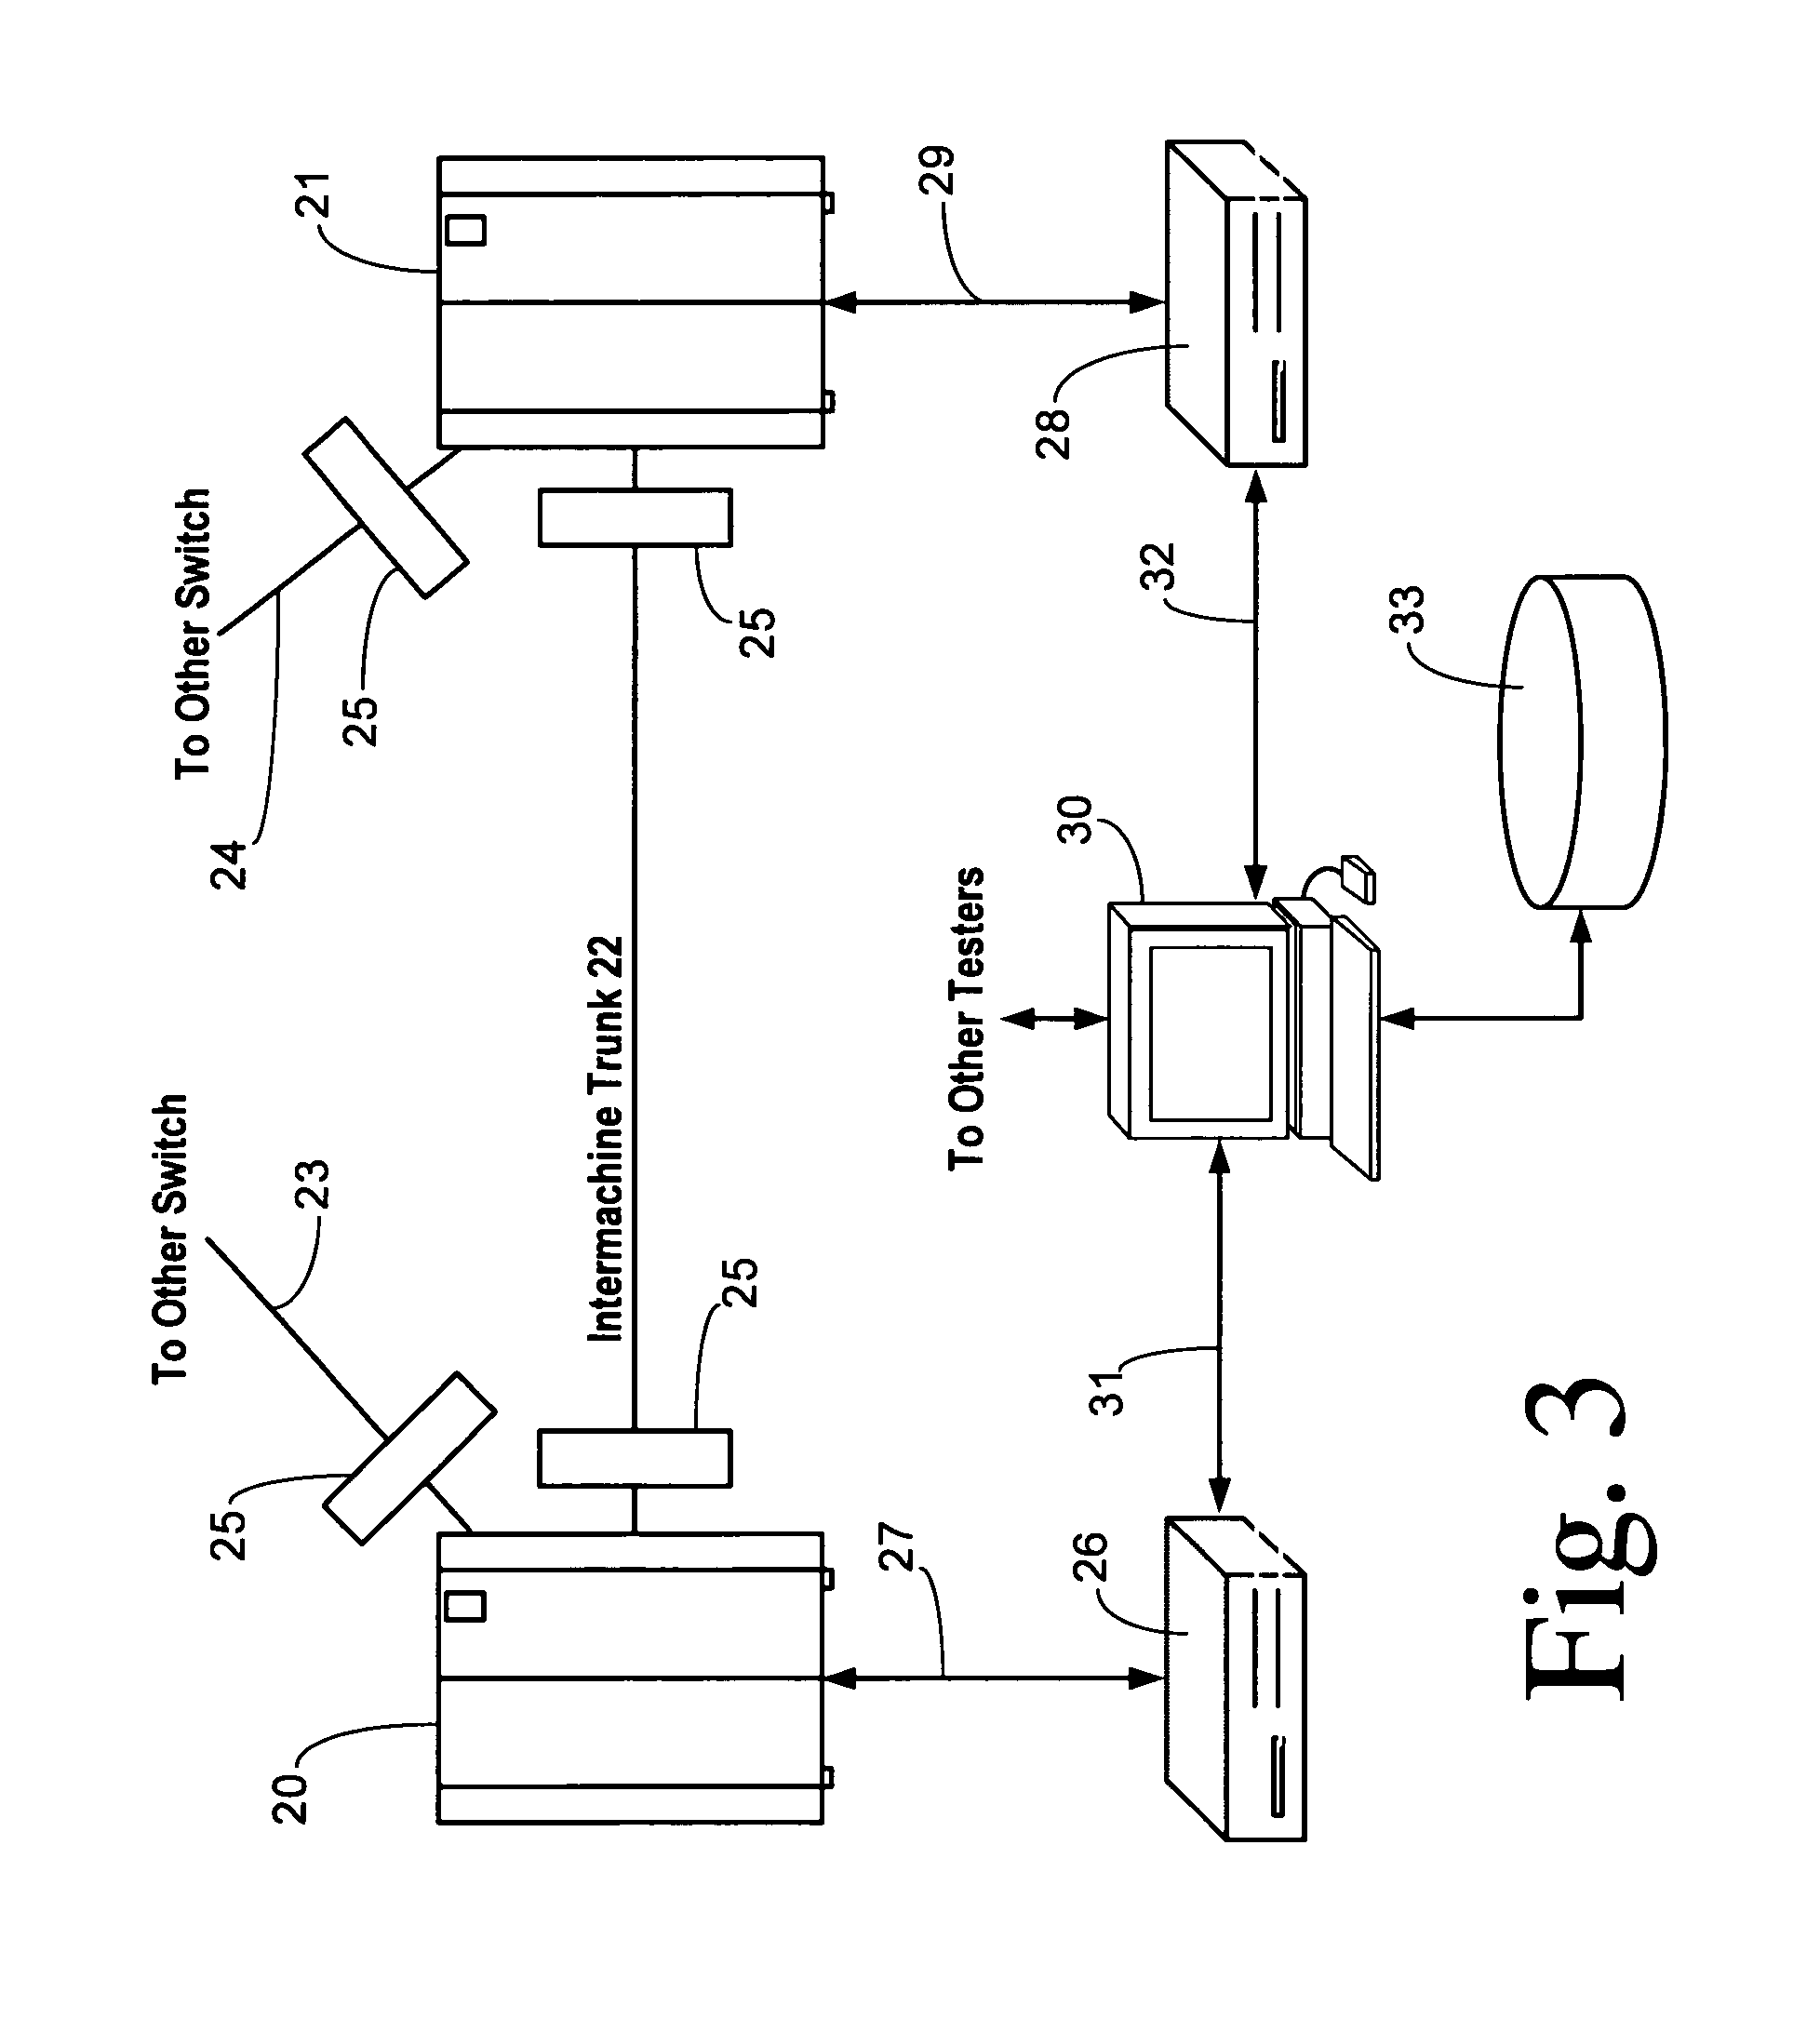 Scheduling of automated tests in a telecommunication system